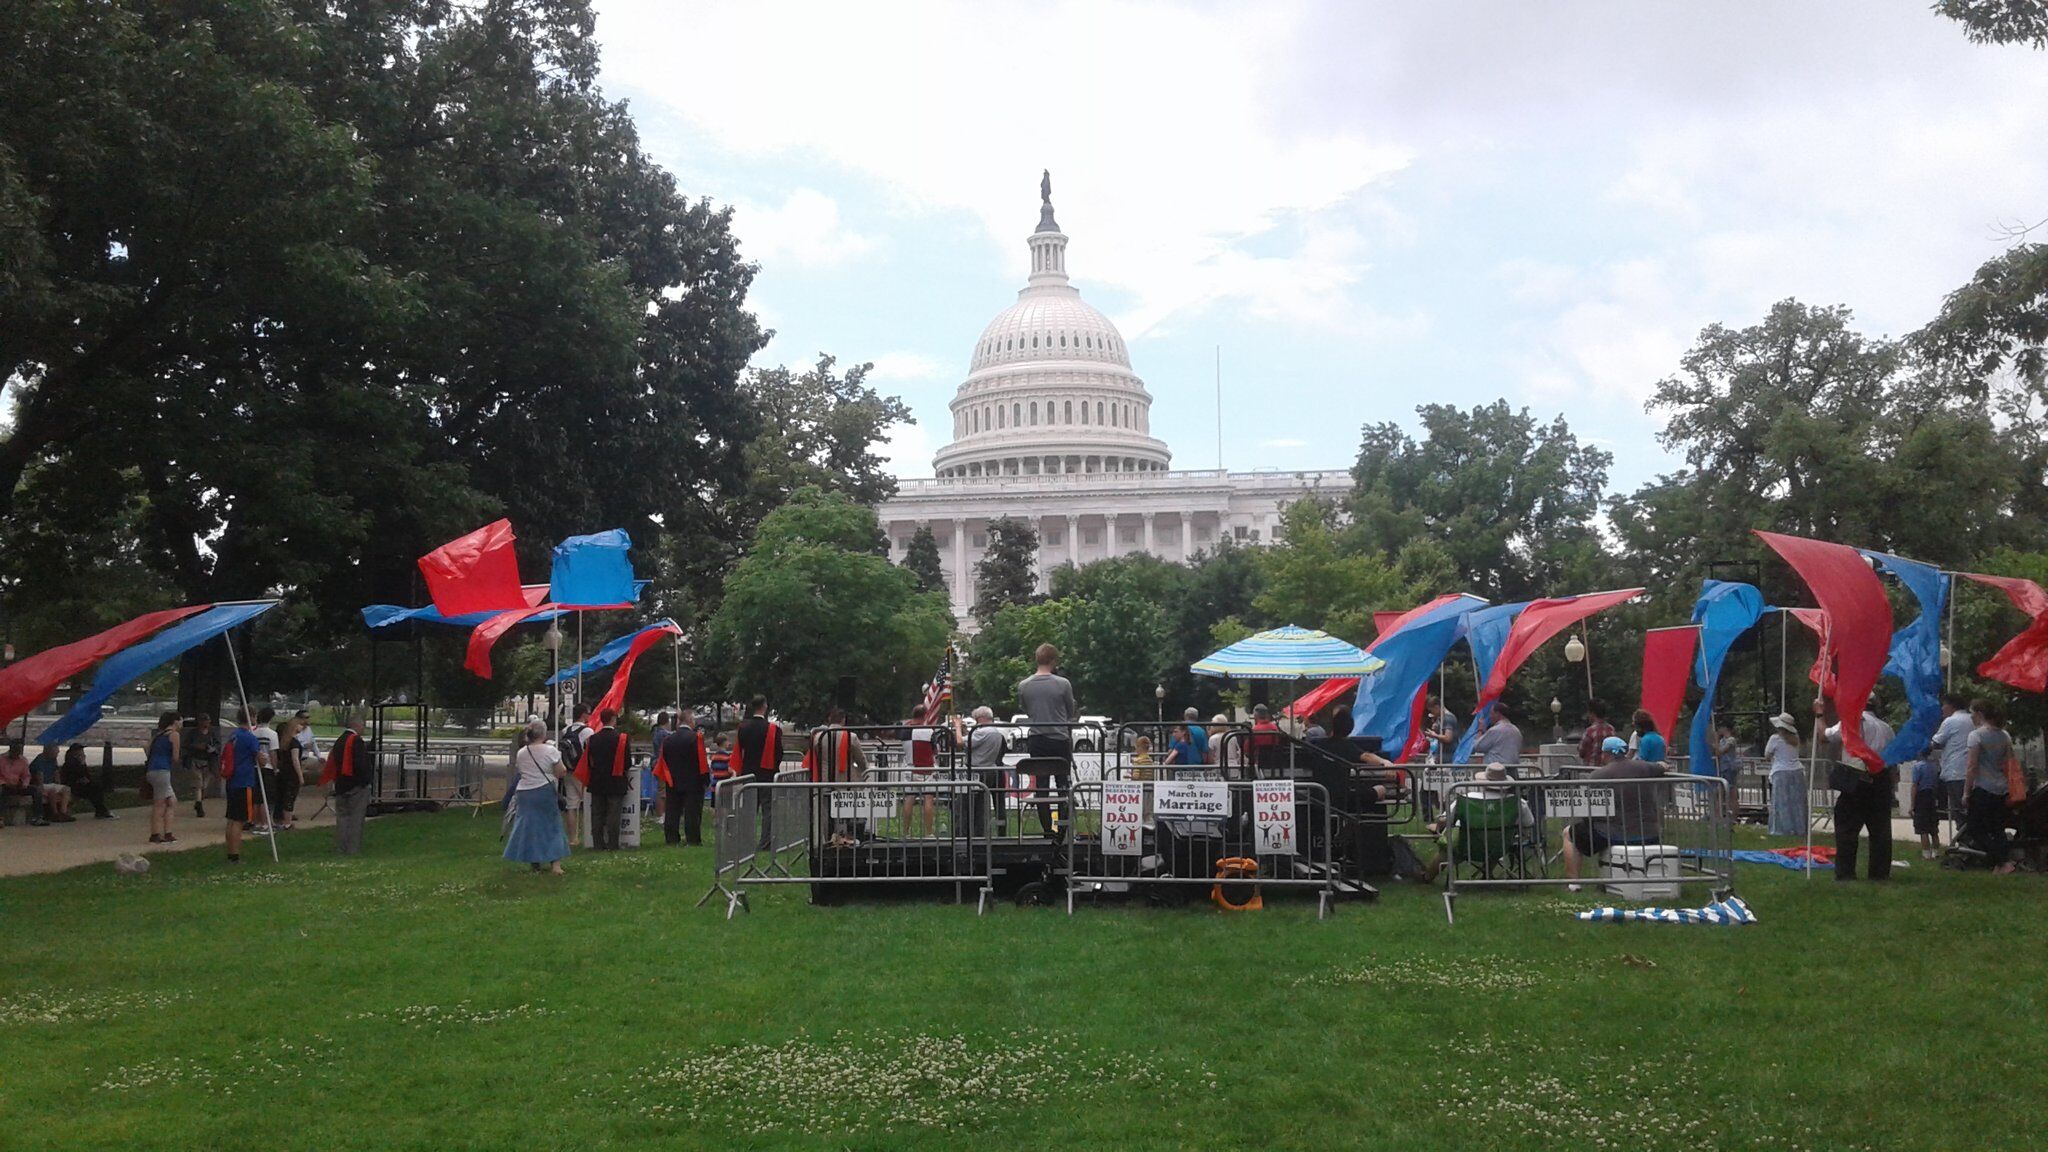 NOM held a hate rally and almost nobody showed up